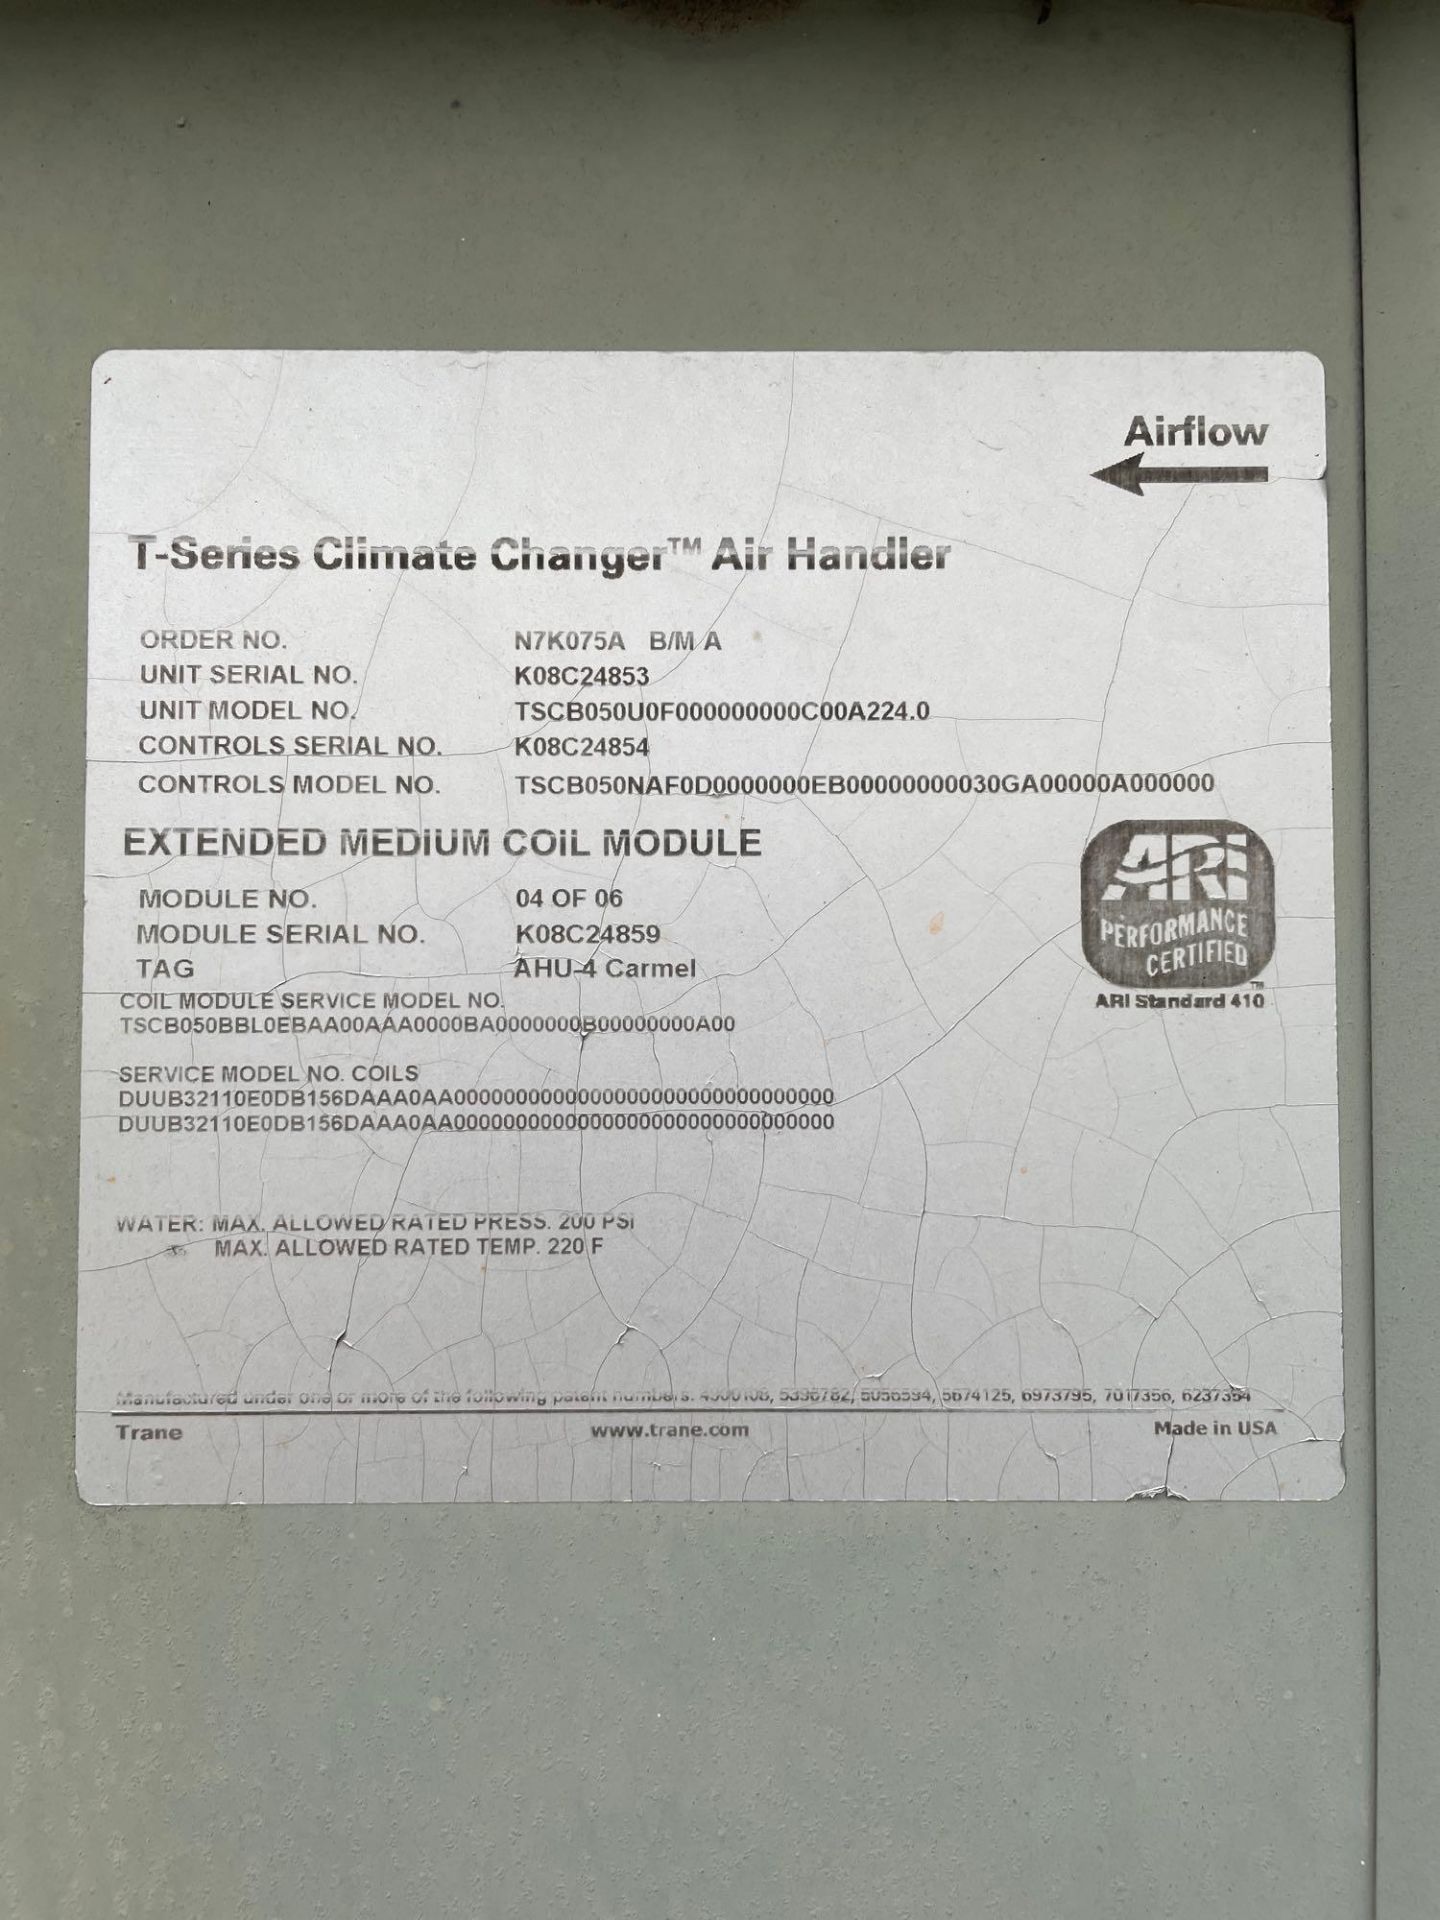 Trane T-Series Climate Changer Air Handler - Image 5 of 6